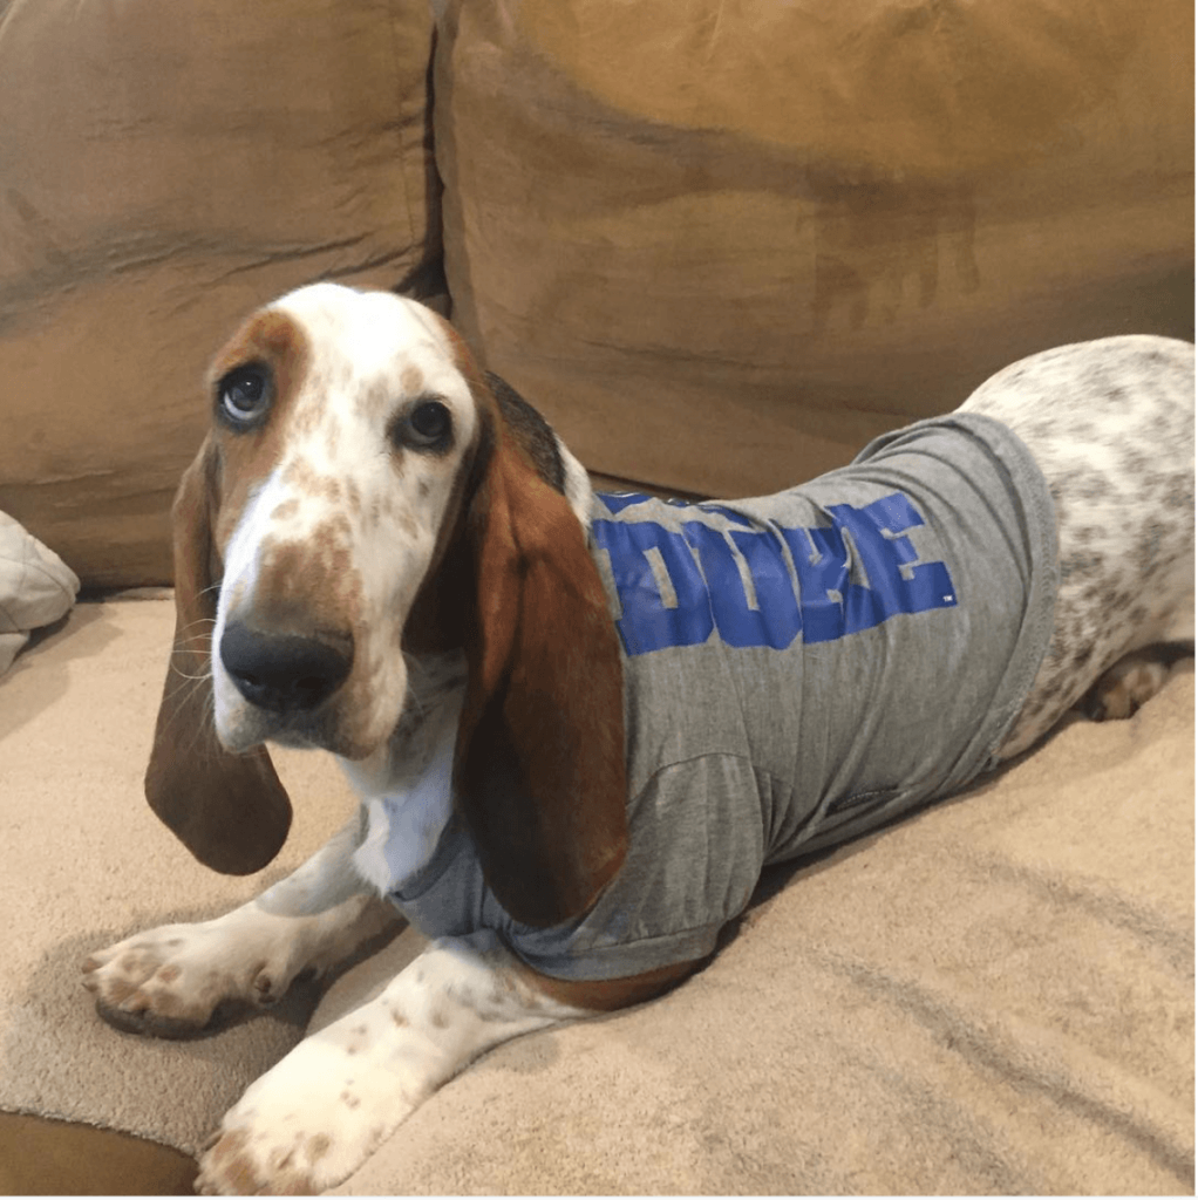 Dog lays on couch in a grey Duke shirt.